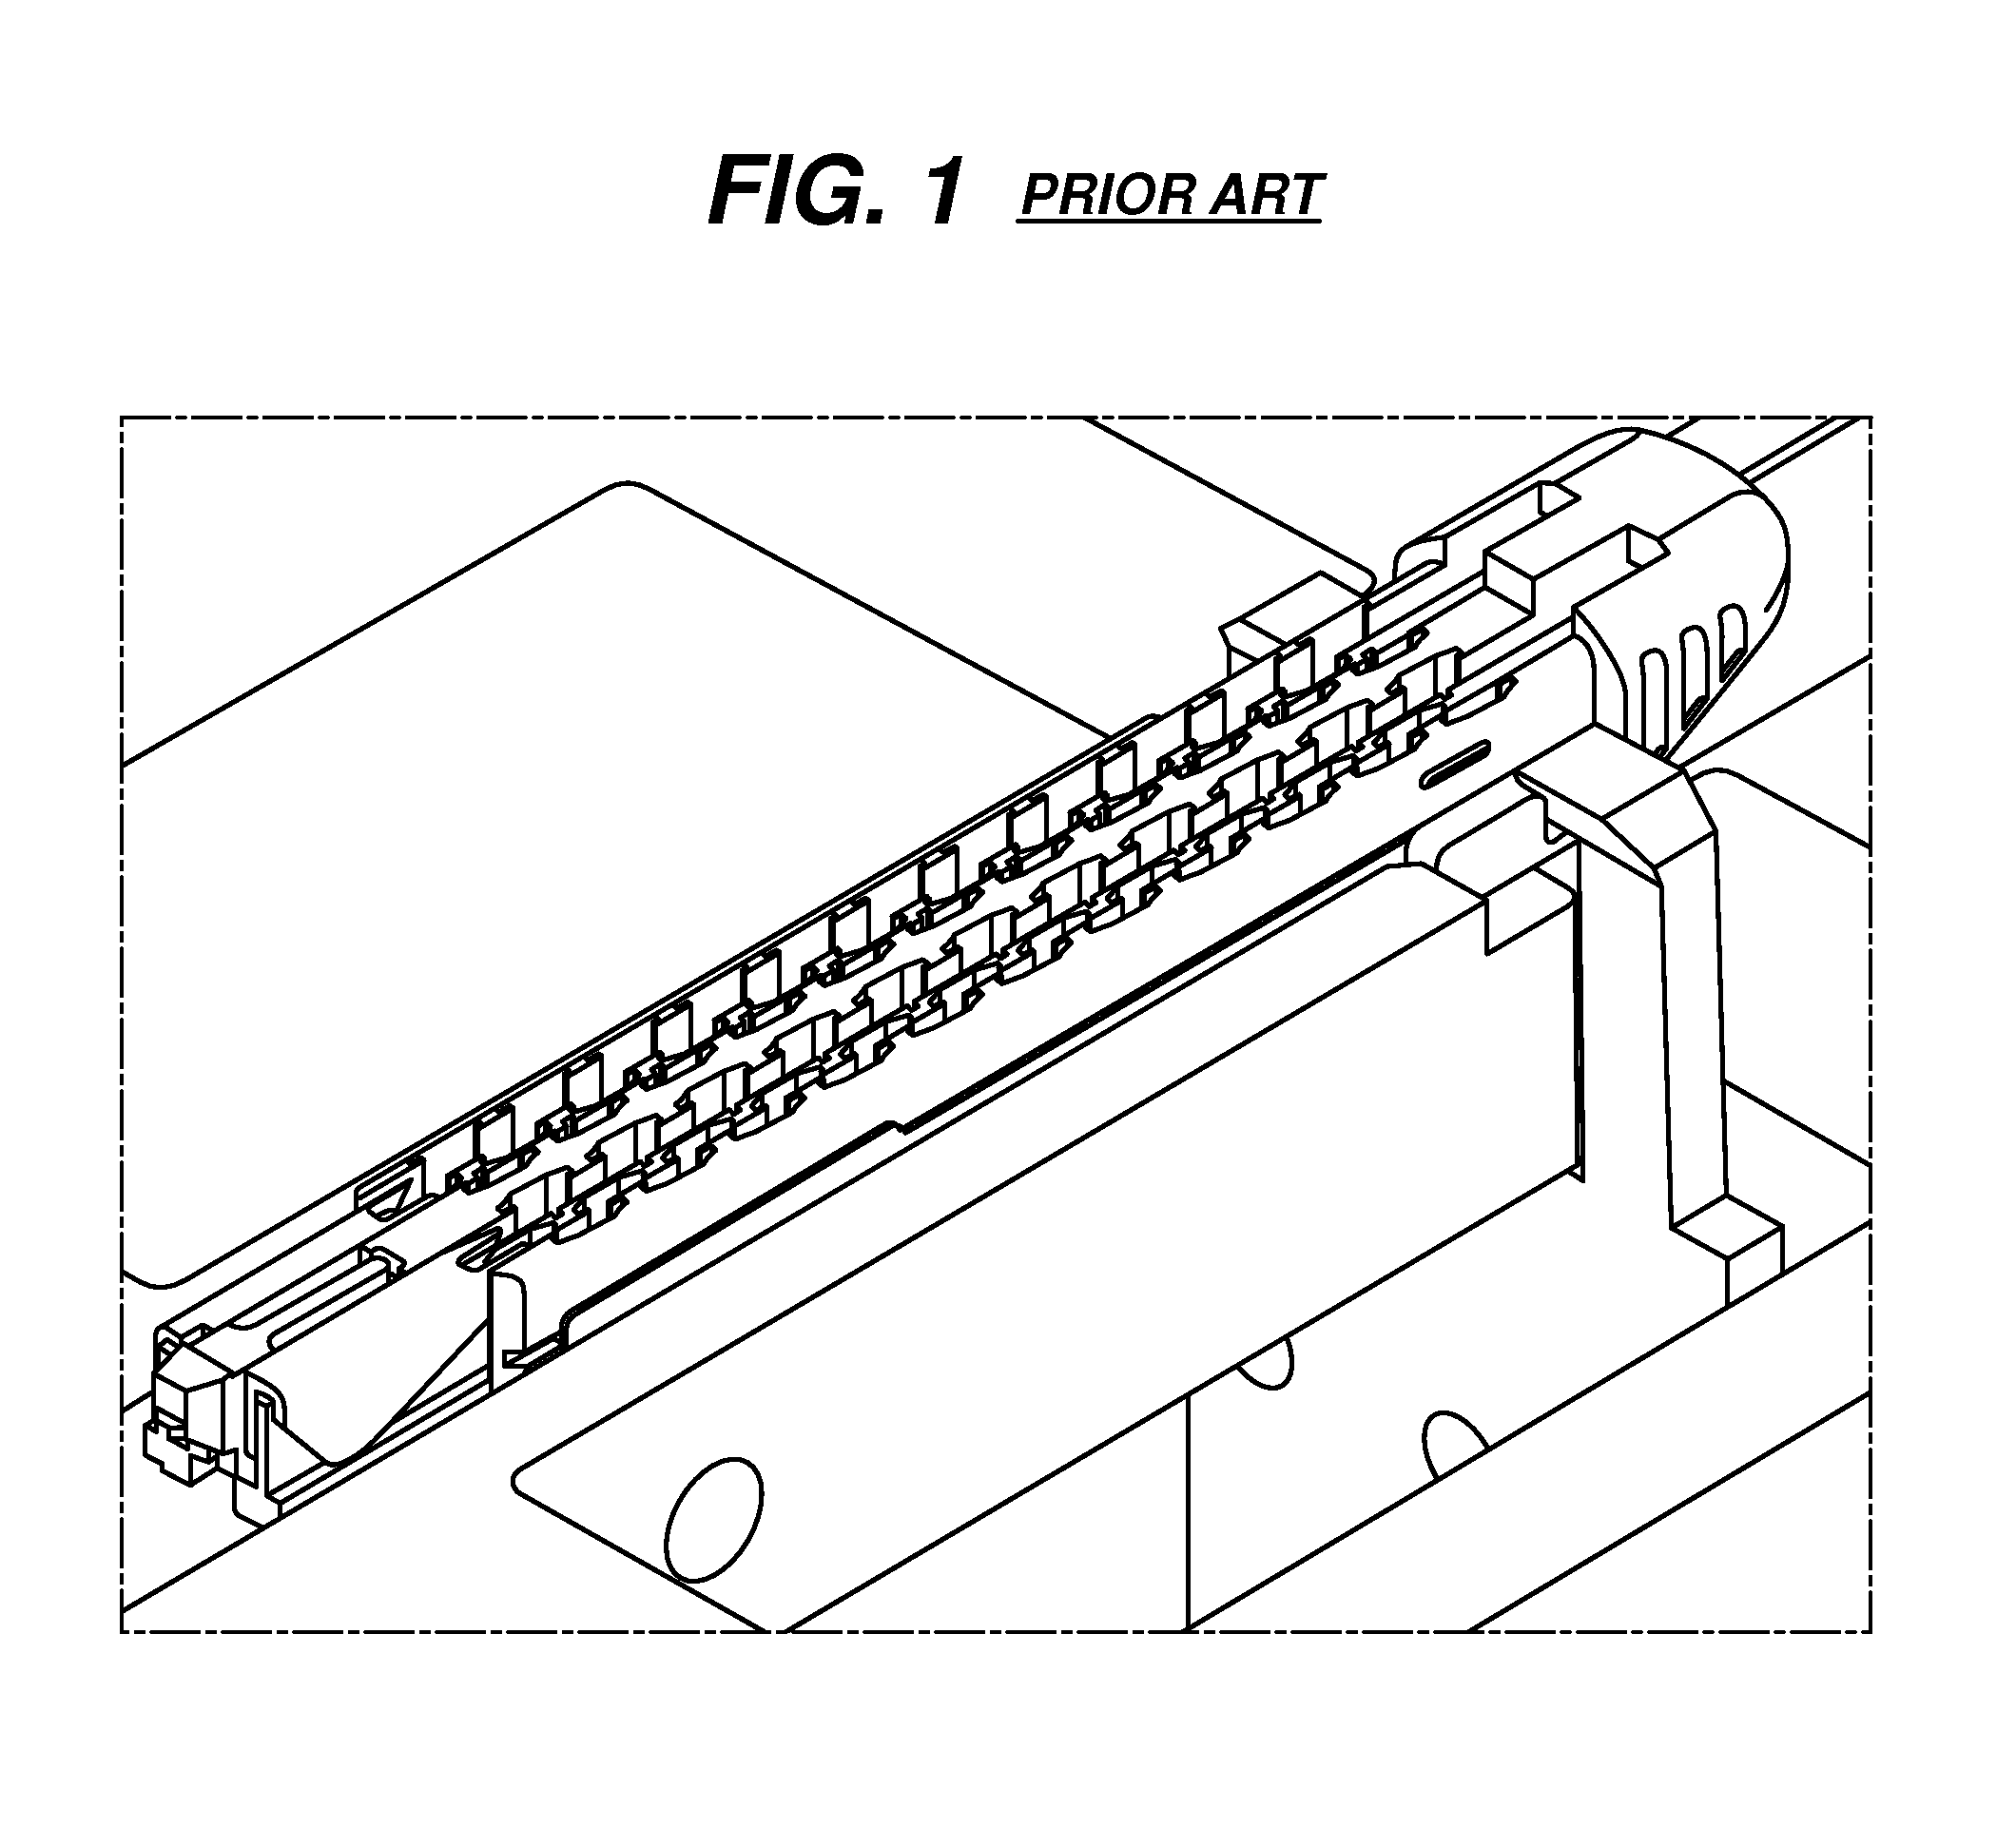 Method and apparatus for testing for the presence of excess drivers in a surgical cartridge